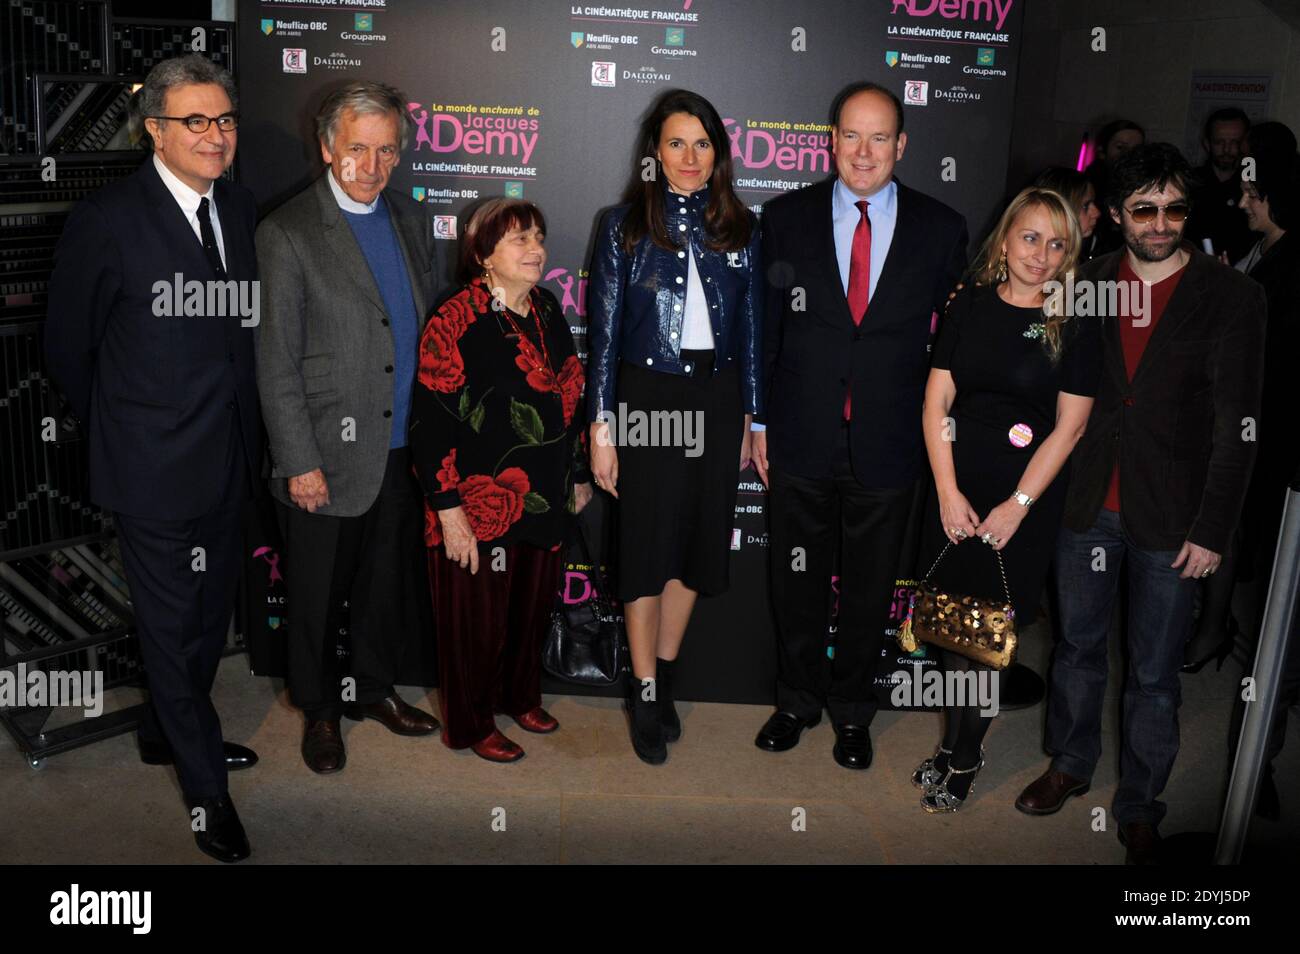 Serge Tubiana, Costa Gavras, Agnes Varda, Aurelie Filippetti, Prince Albert de Monaco, Rosalie Varda and Mathieu Demy attending the 'Le Monde Enchante de Jacques Demy' exhibition opening at the french Cinematheque in Paris, France on April 08, 2013. Photo by Aurore Marechal/ABACAPRESS.COM Stock Photo